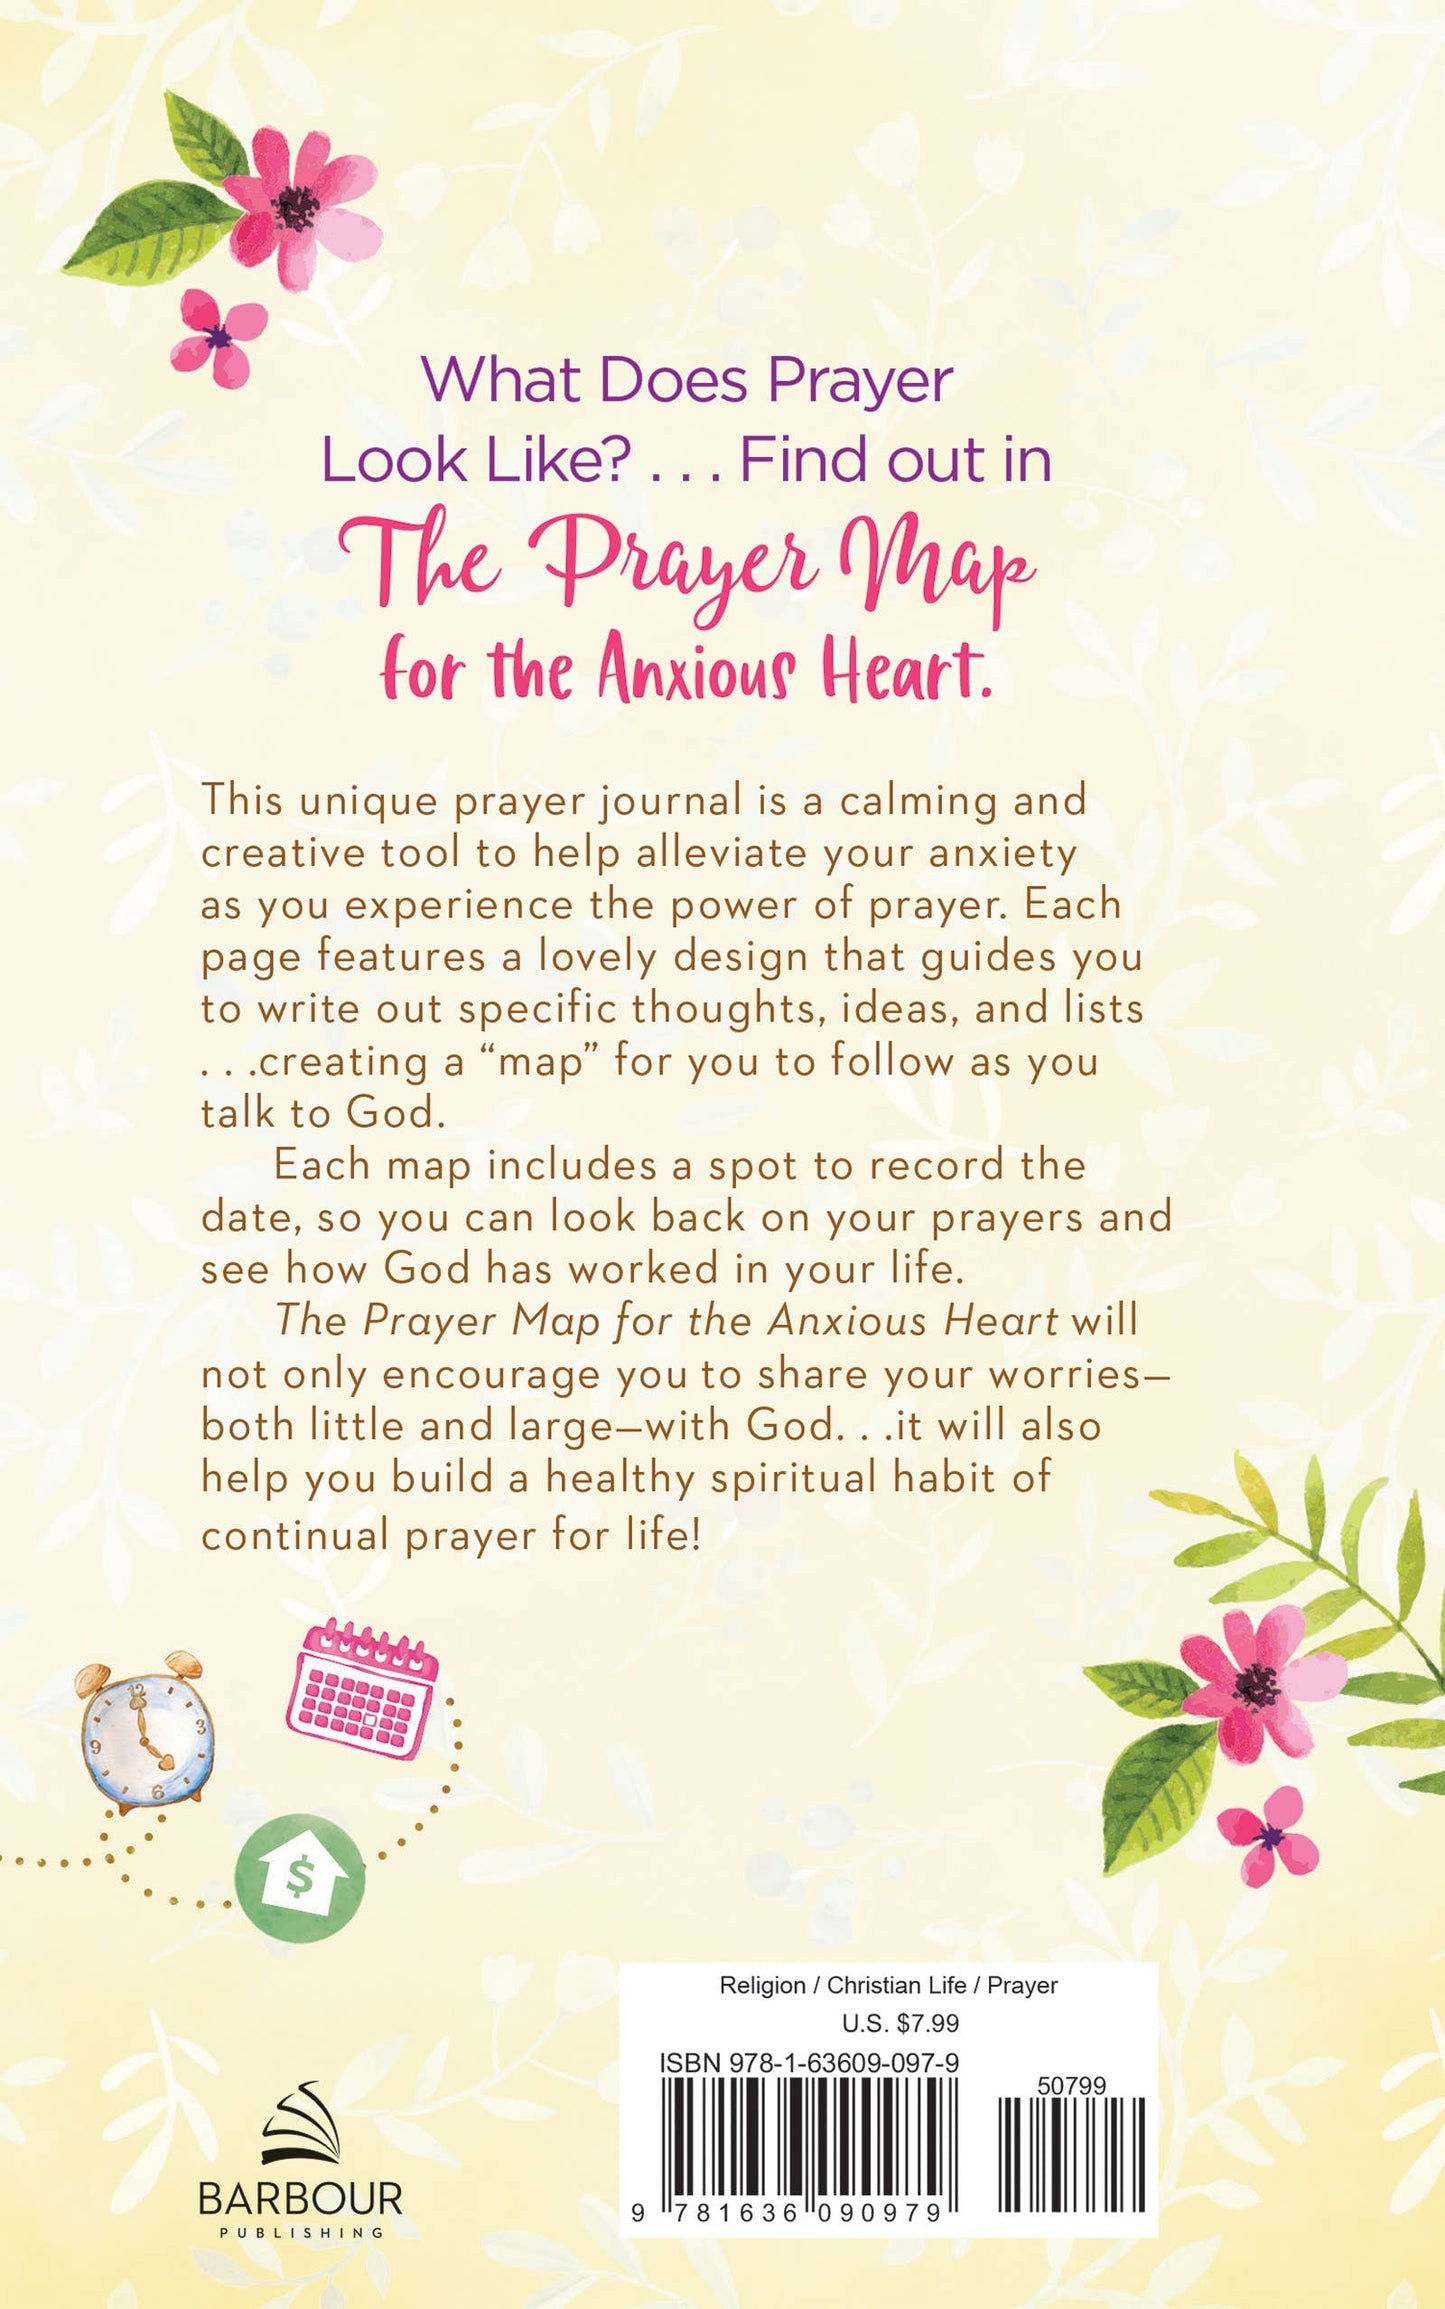 The Prayer Map® for the Anxious Heart